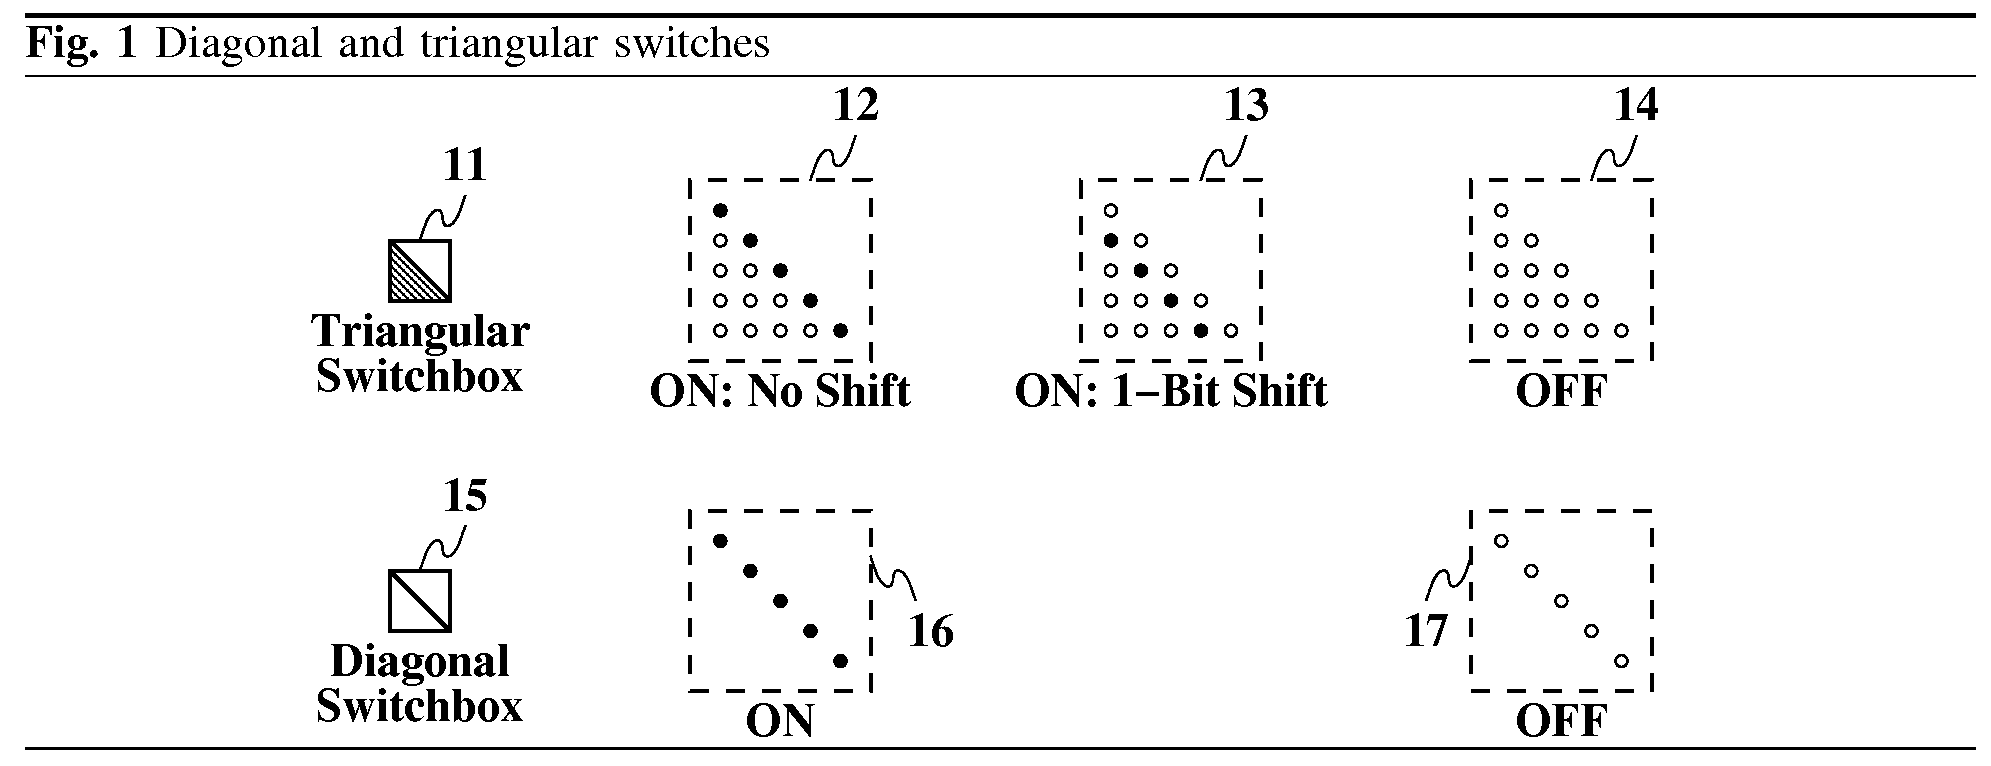 Shift-enabled reconfigurable device